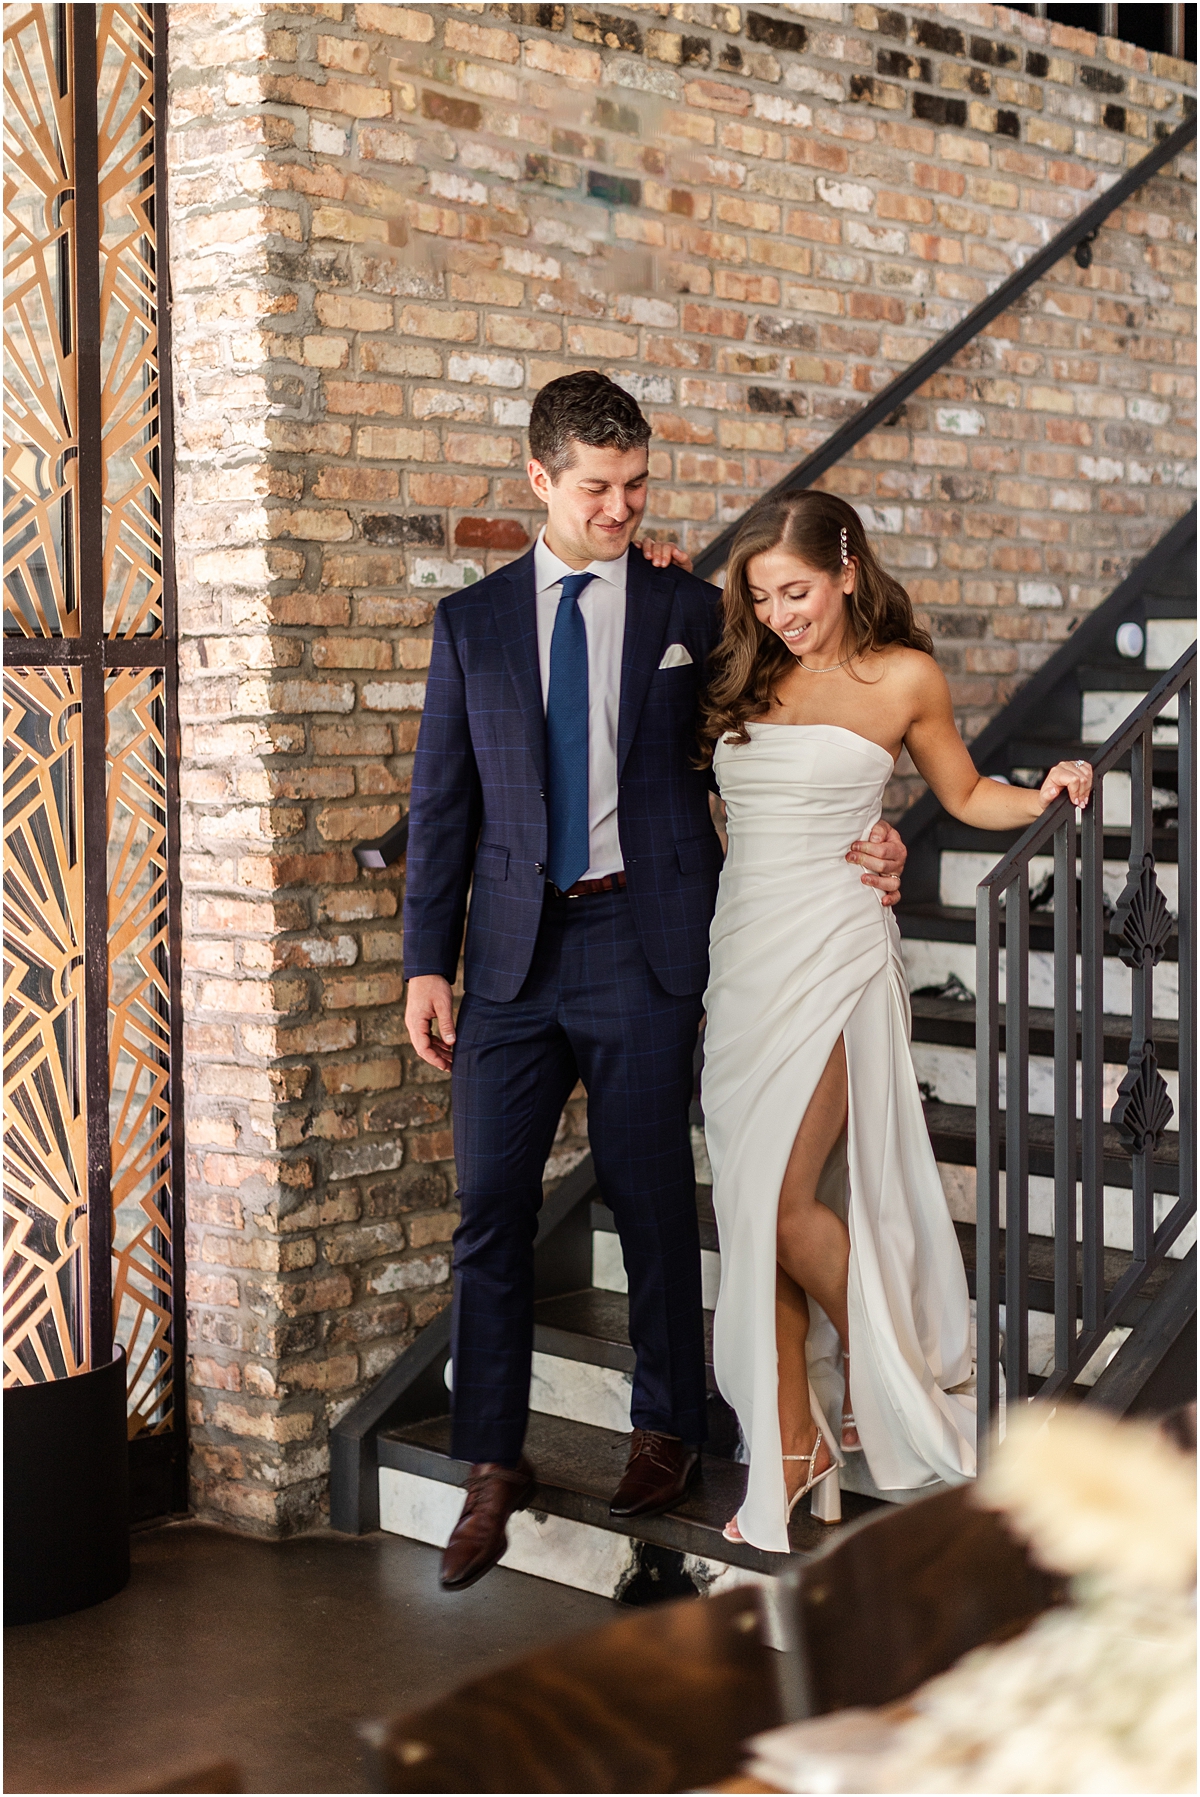 newlywed portraits on stairs 